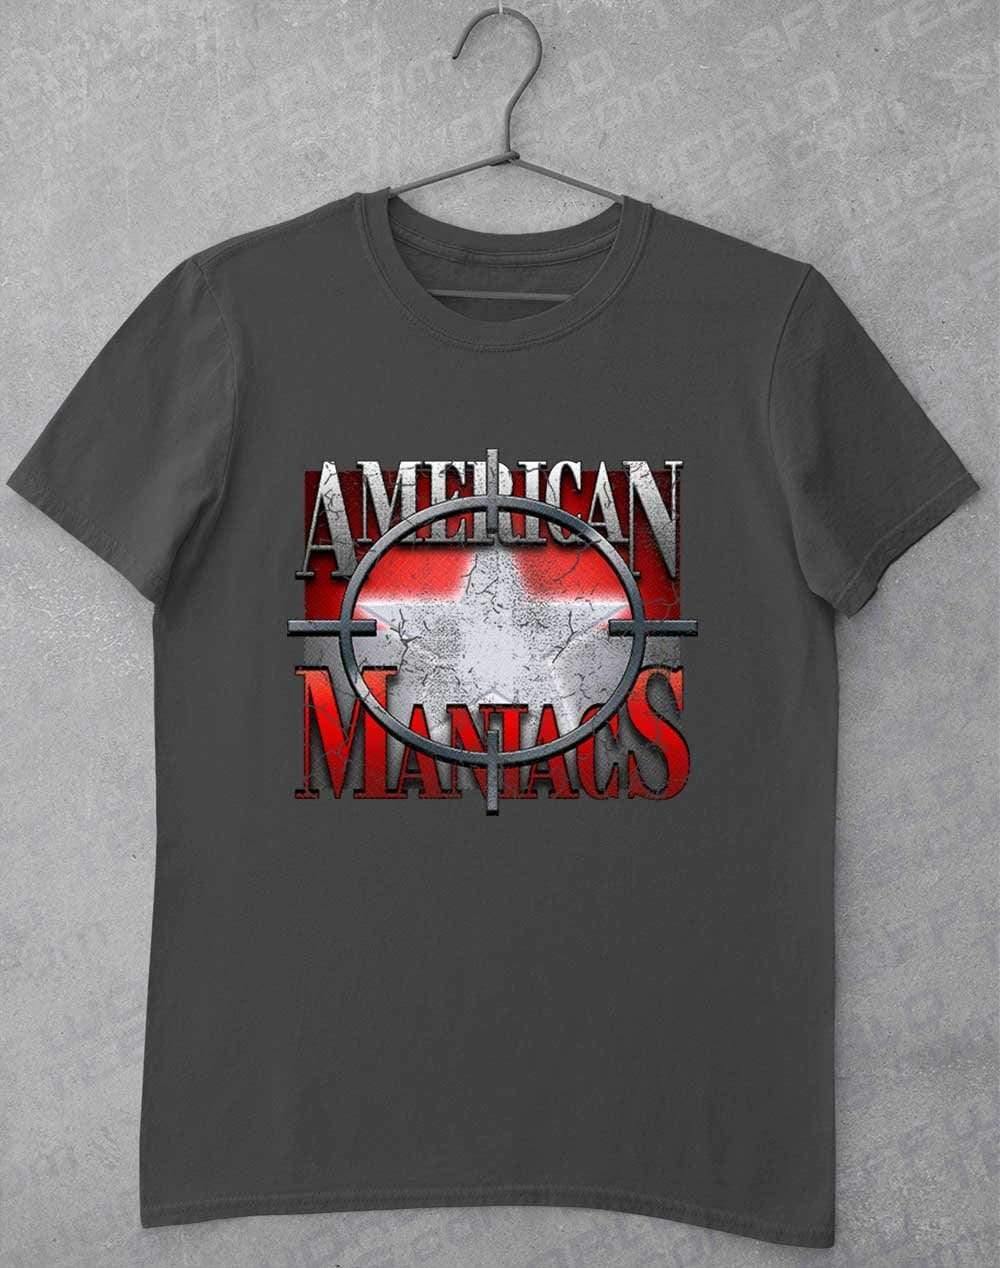 American Maniacs - T-Shirt S / Charcoal  - Off World Tees